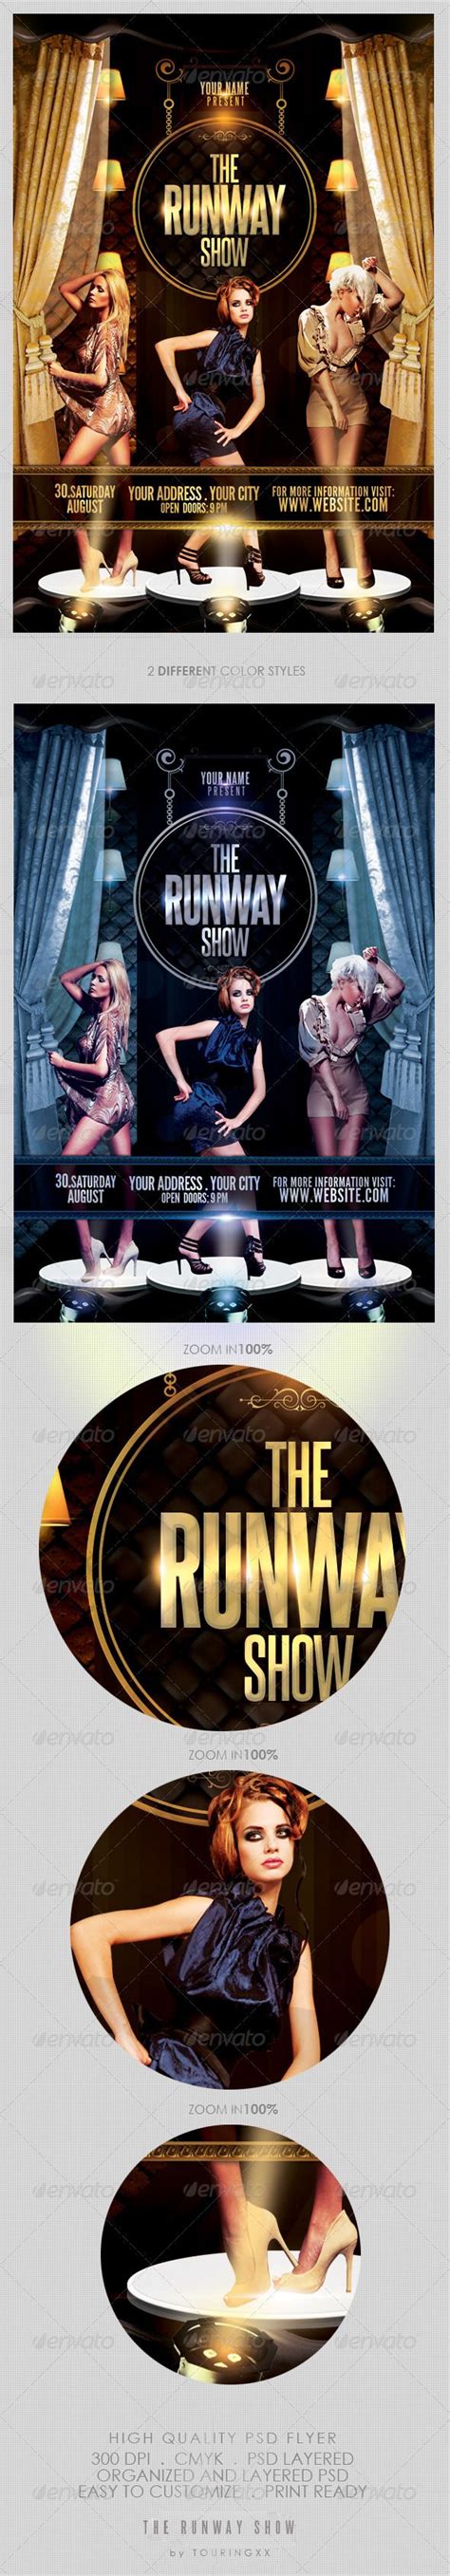 The Runway Show Flyer Template Flyer Template Flyer Event Poster Design